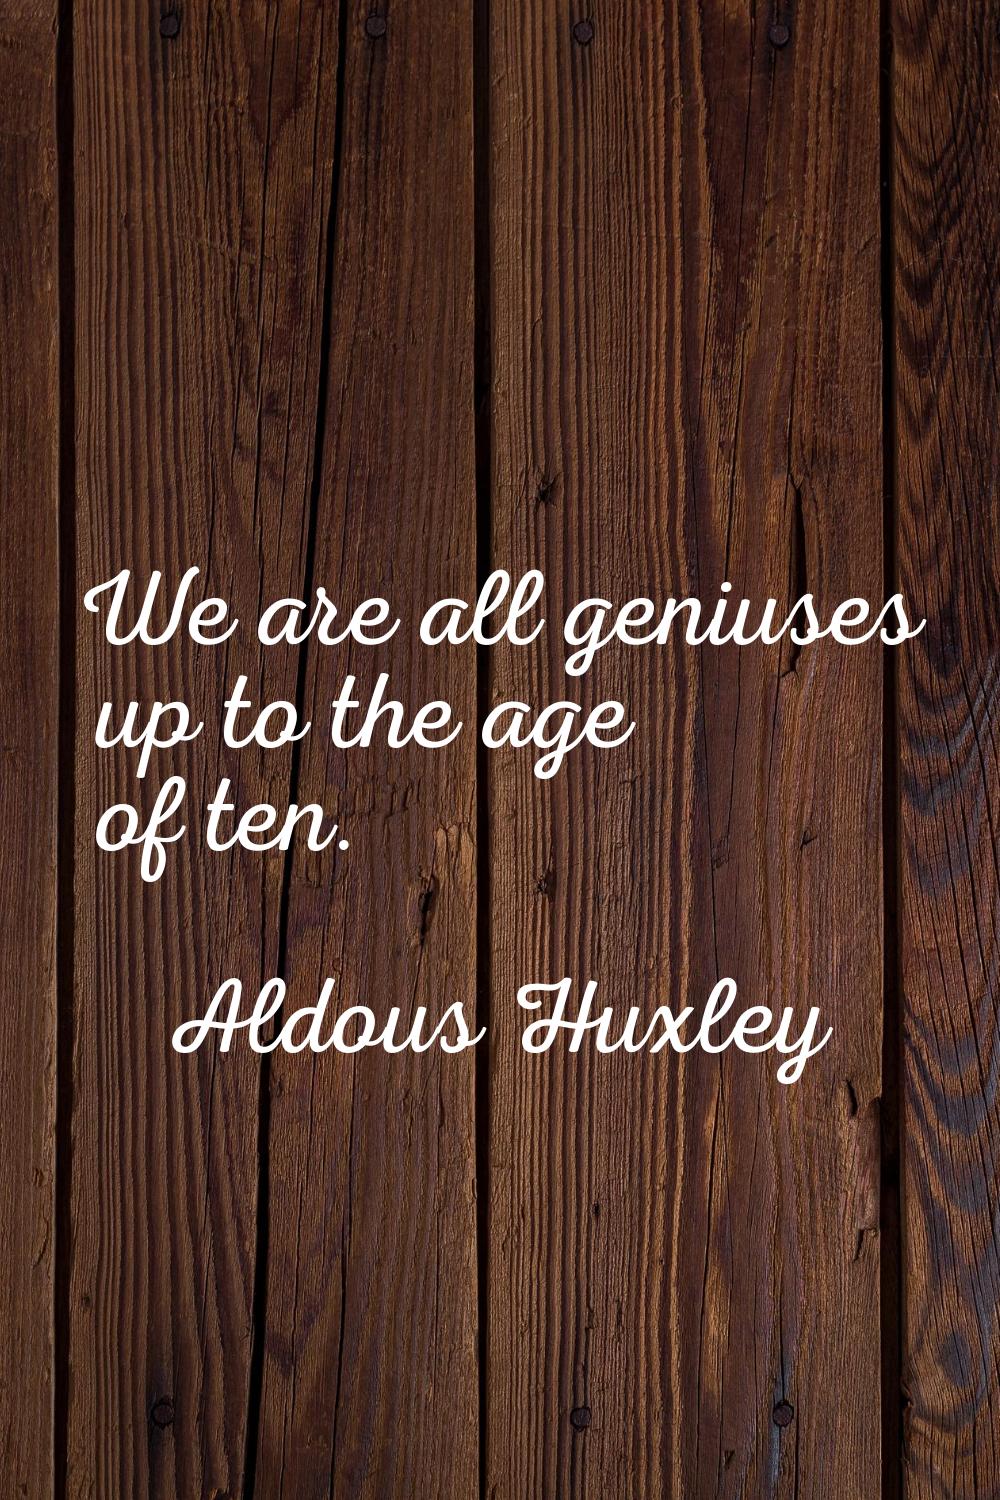 We are all geniuses up to the age of ten.